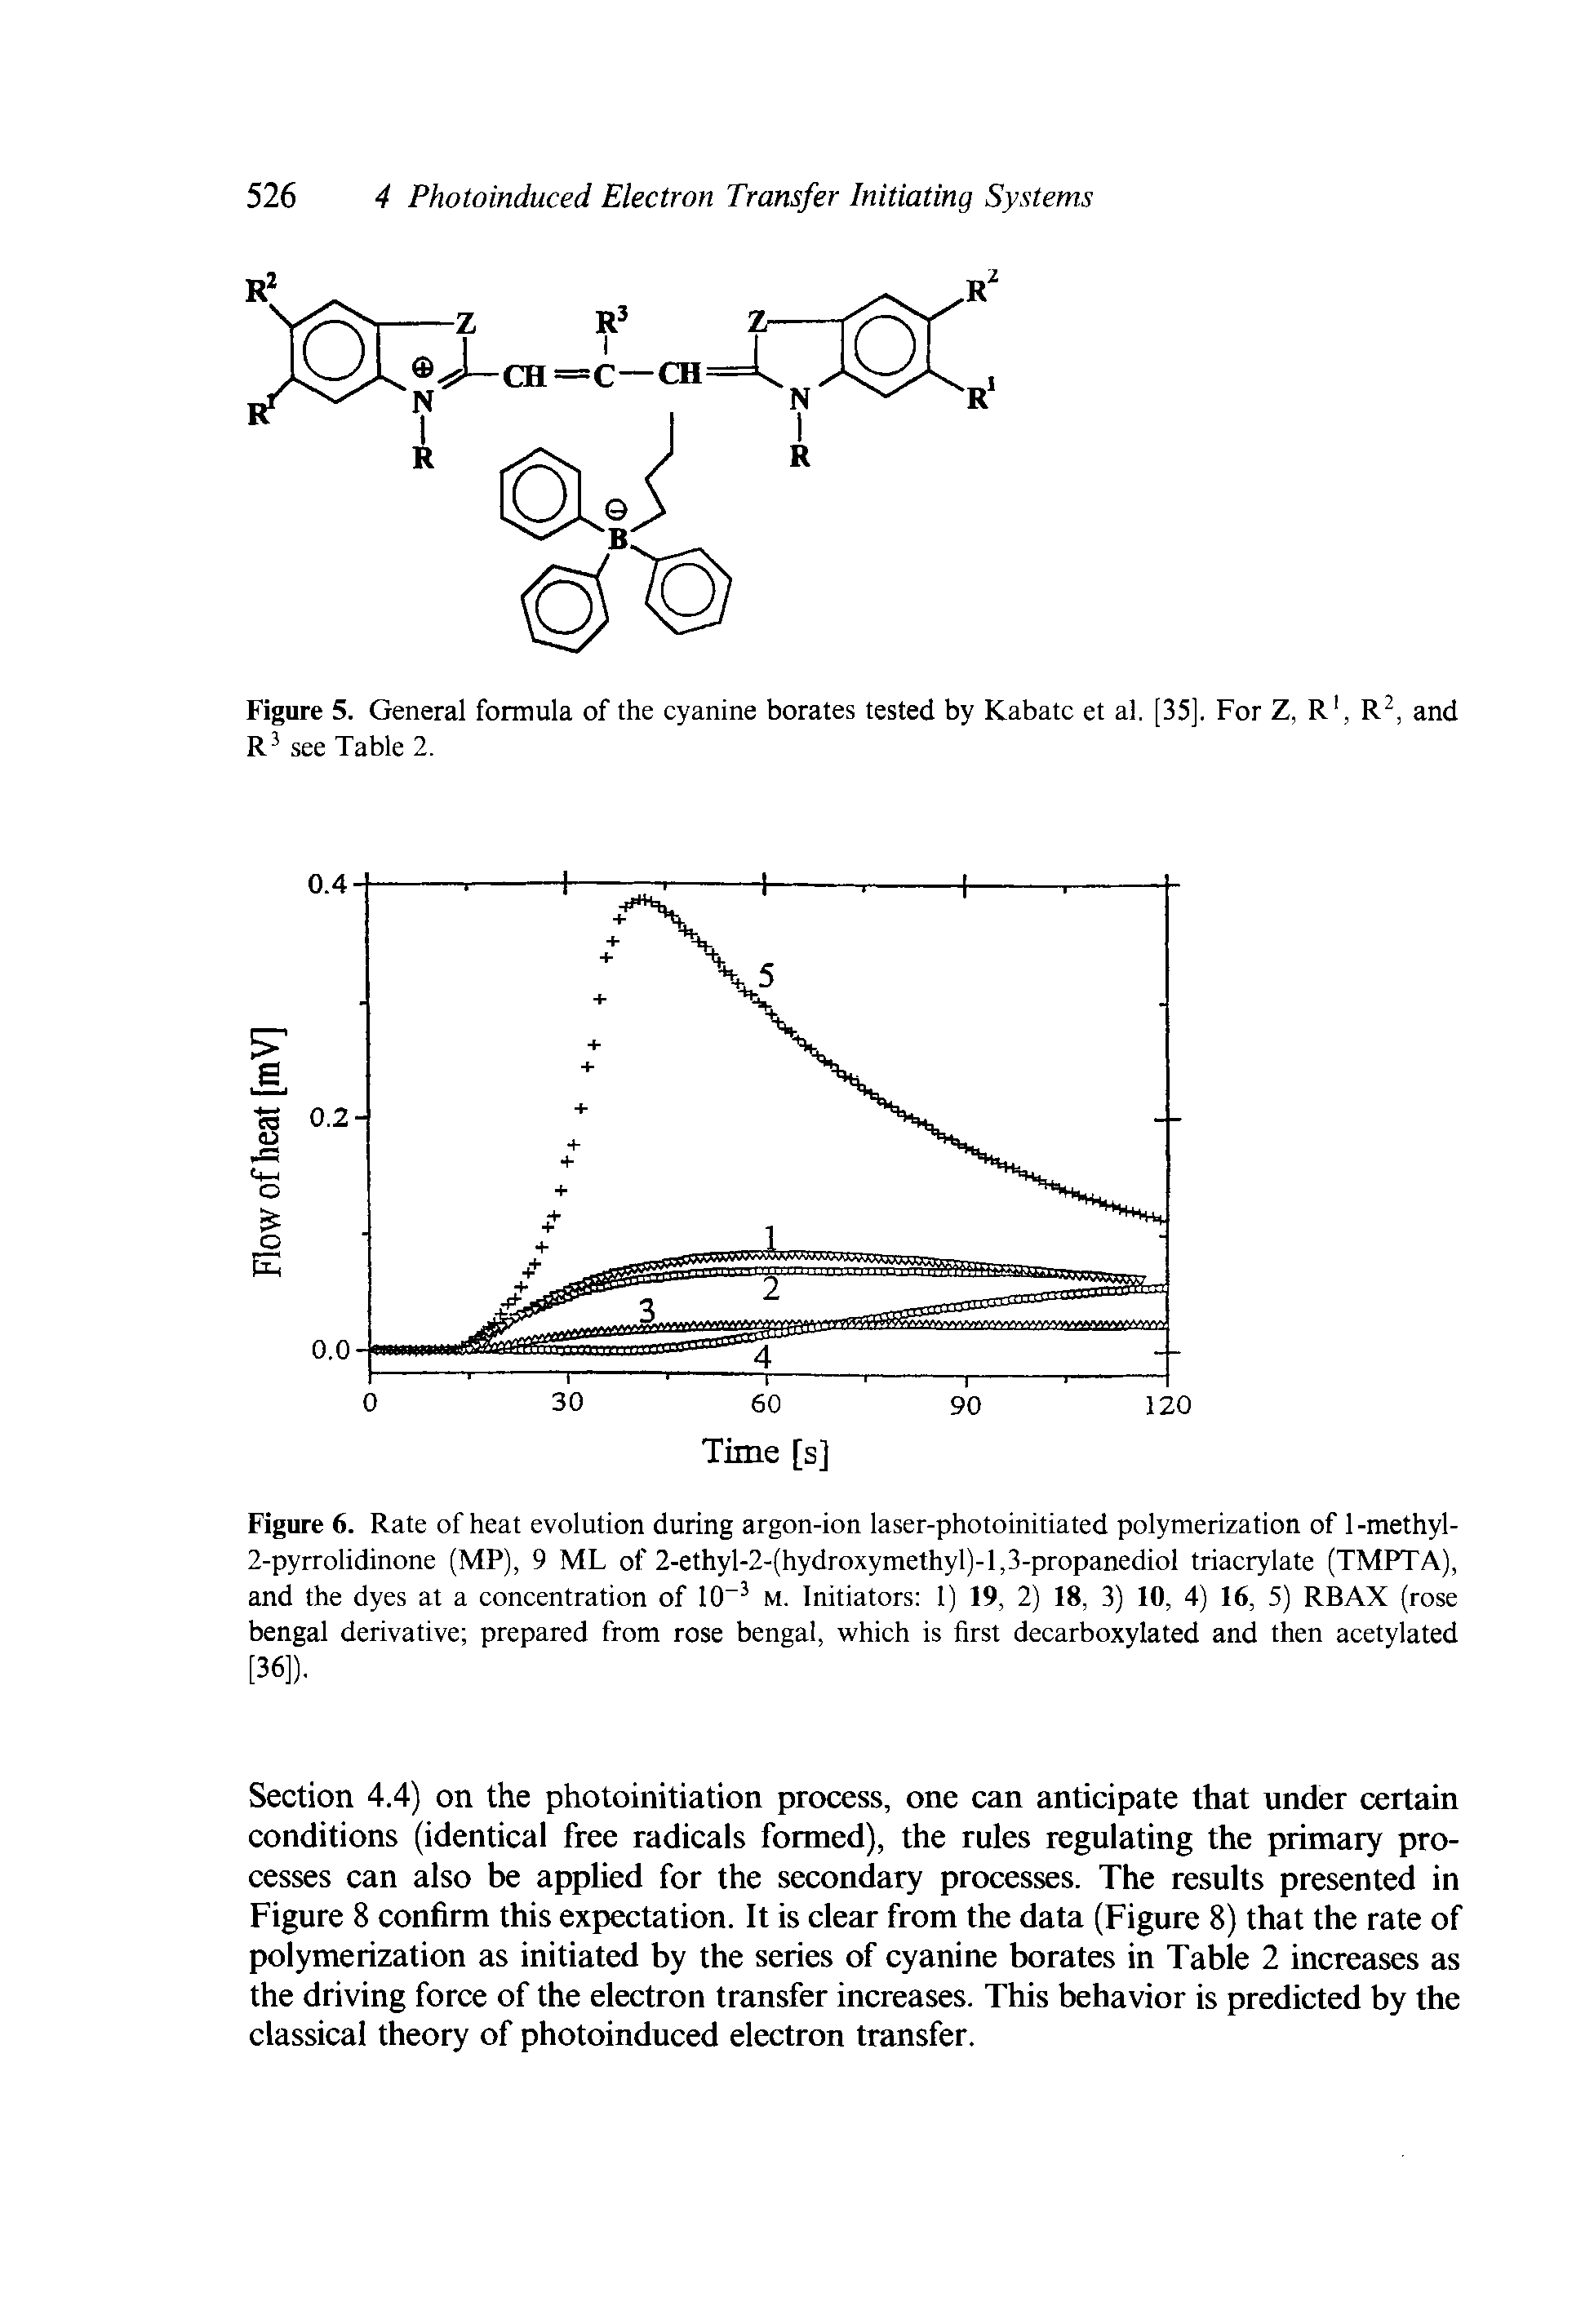 Figure 5. General formula of the cyanine borates tested by Kabatc et al. [35], For Z, R, R, and R see Table 2.